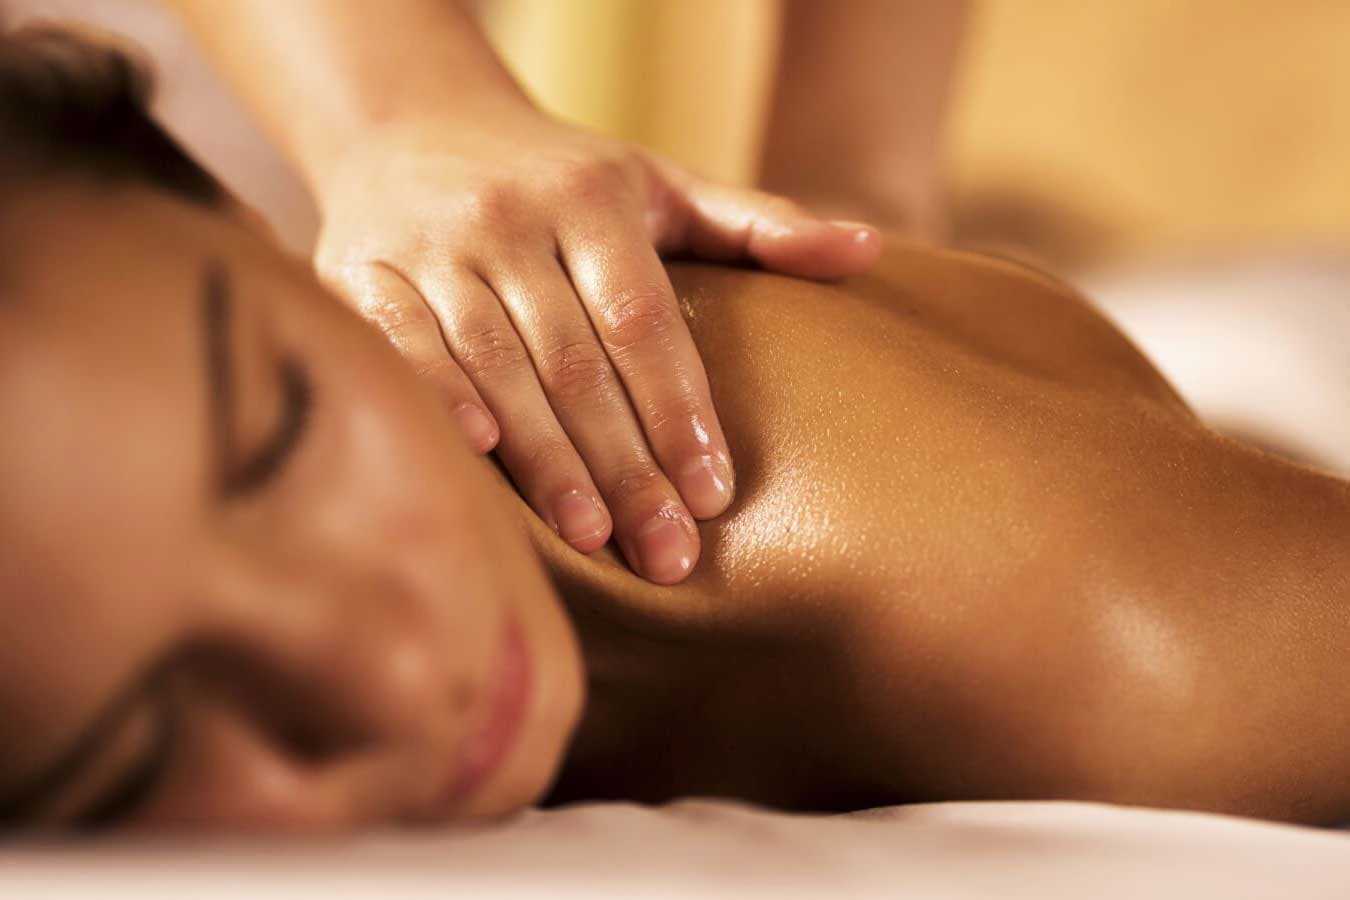 How can massage benefit your entire body?